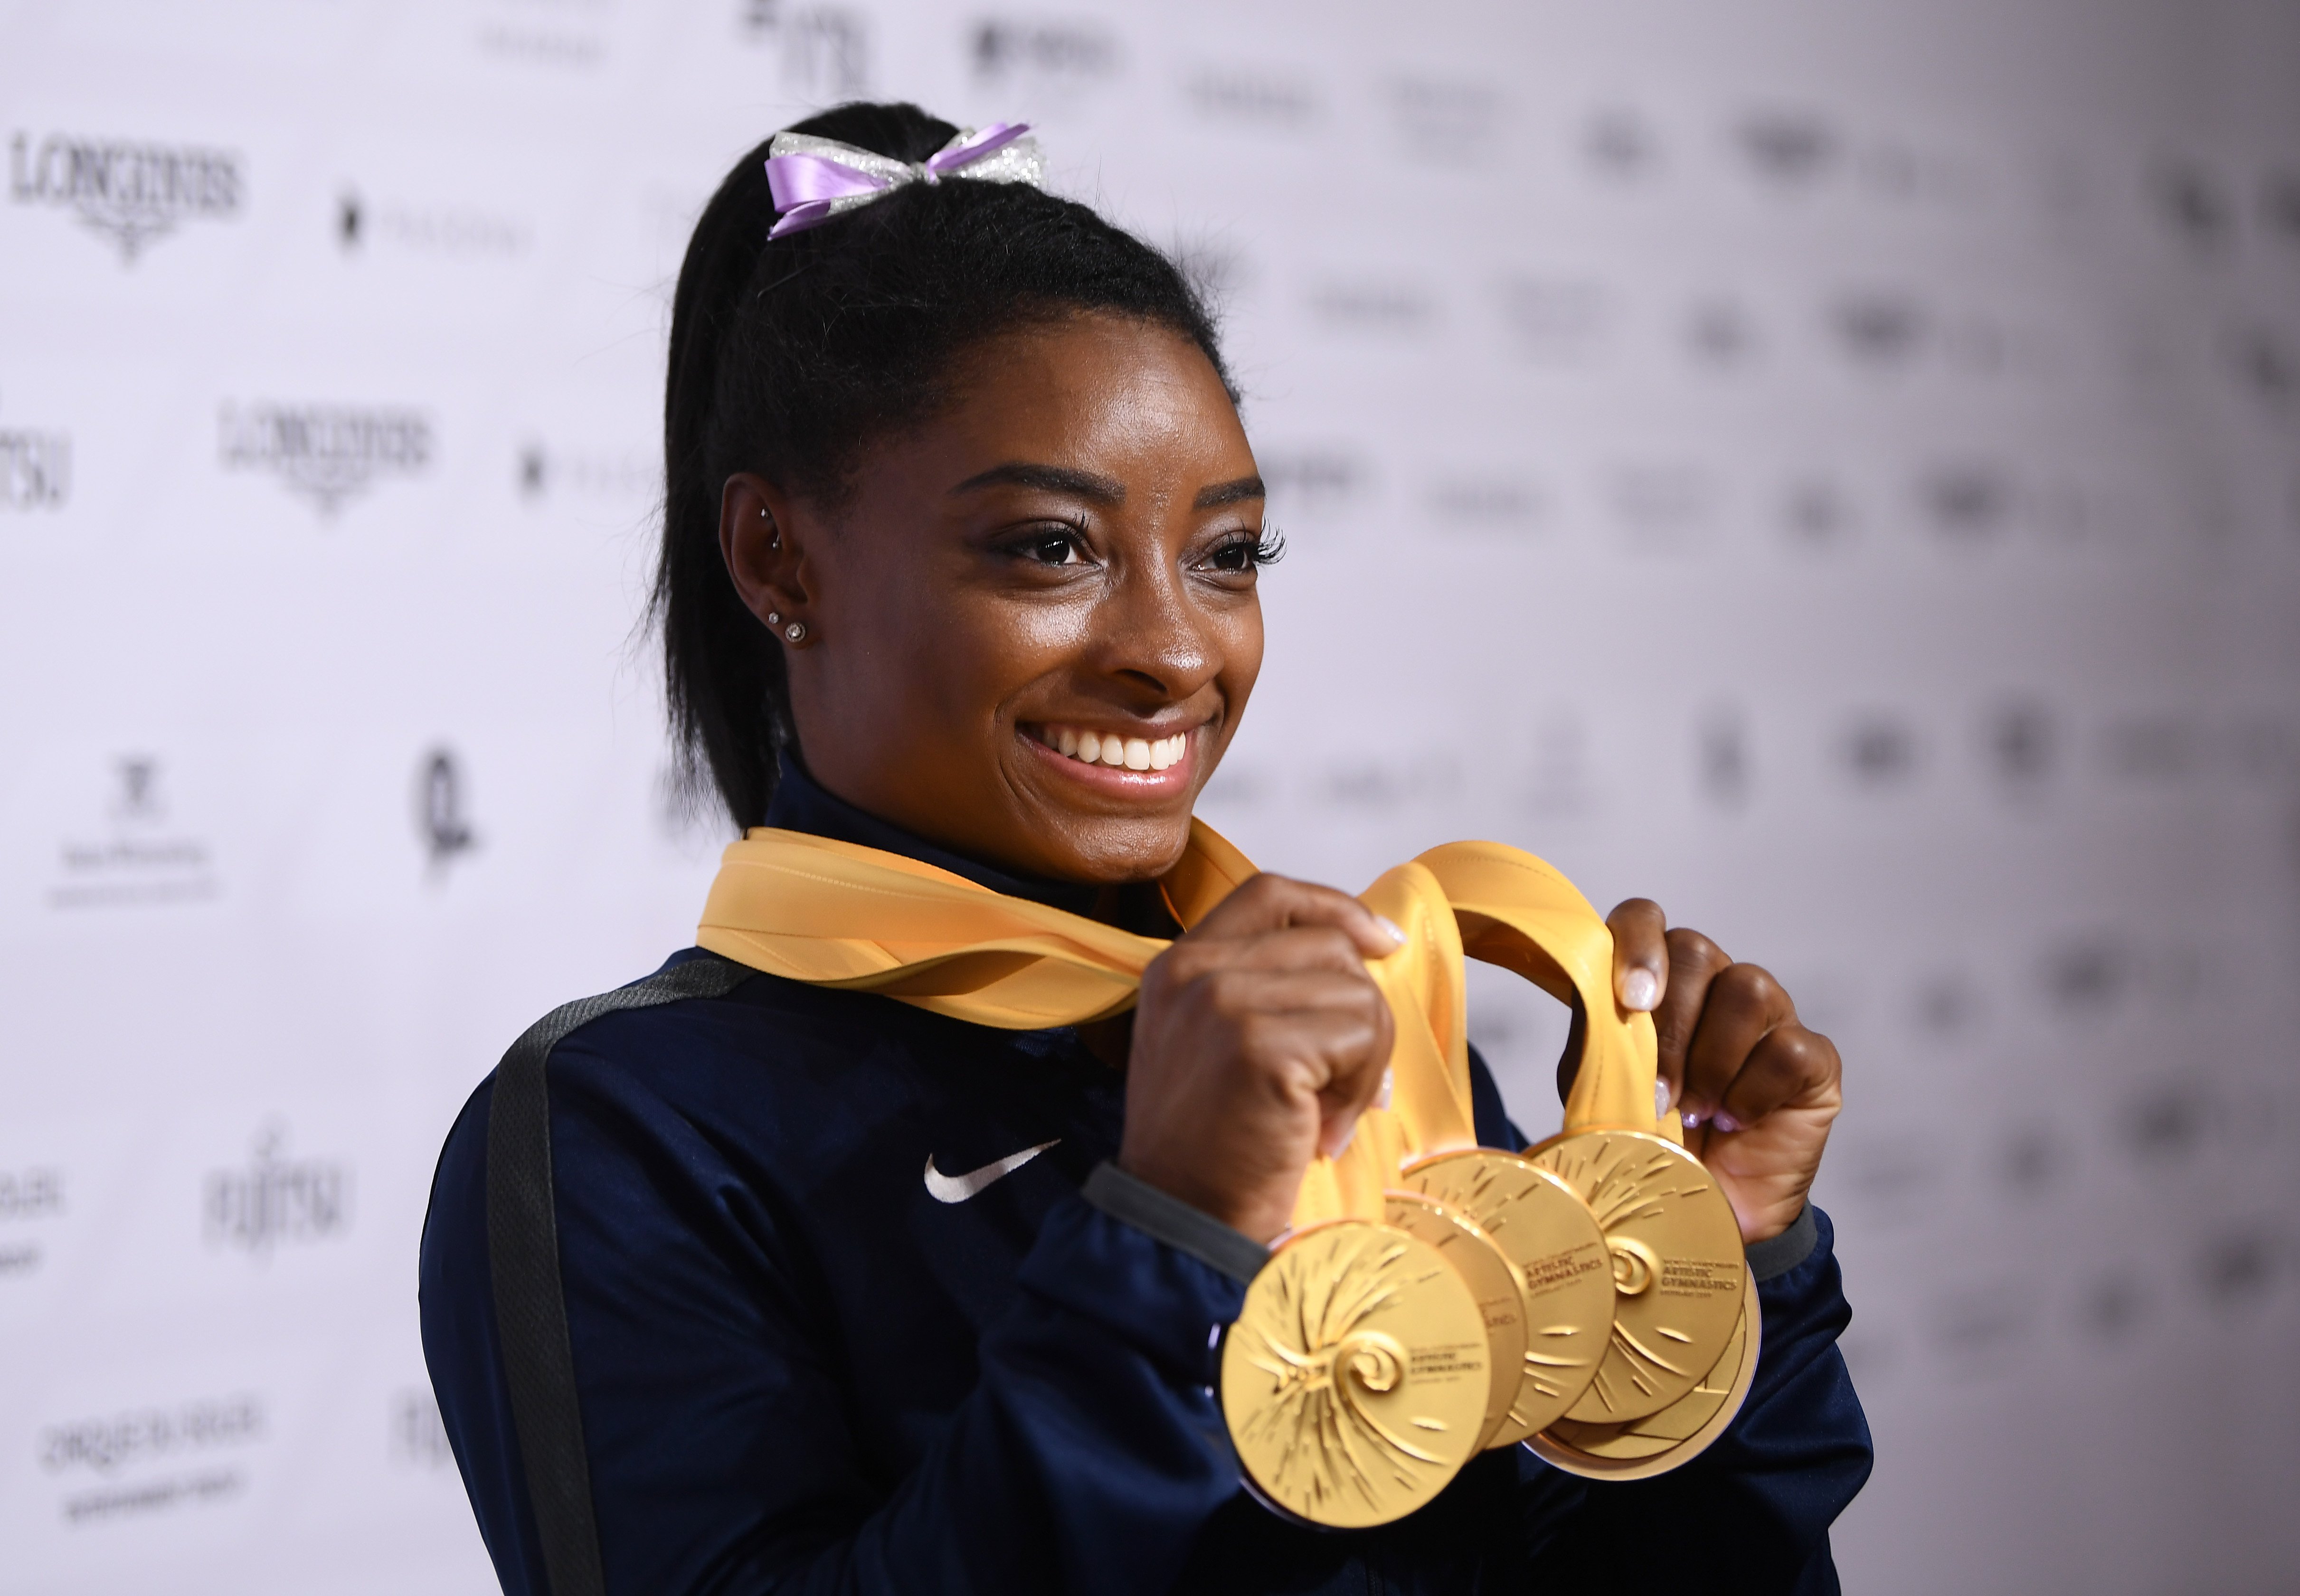 Simone Biles poses with her medals at the the FIG Artistic Gymnastics World Championships on October 13, 2019 | Photo: Getty Images